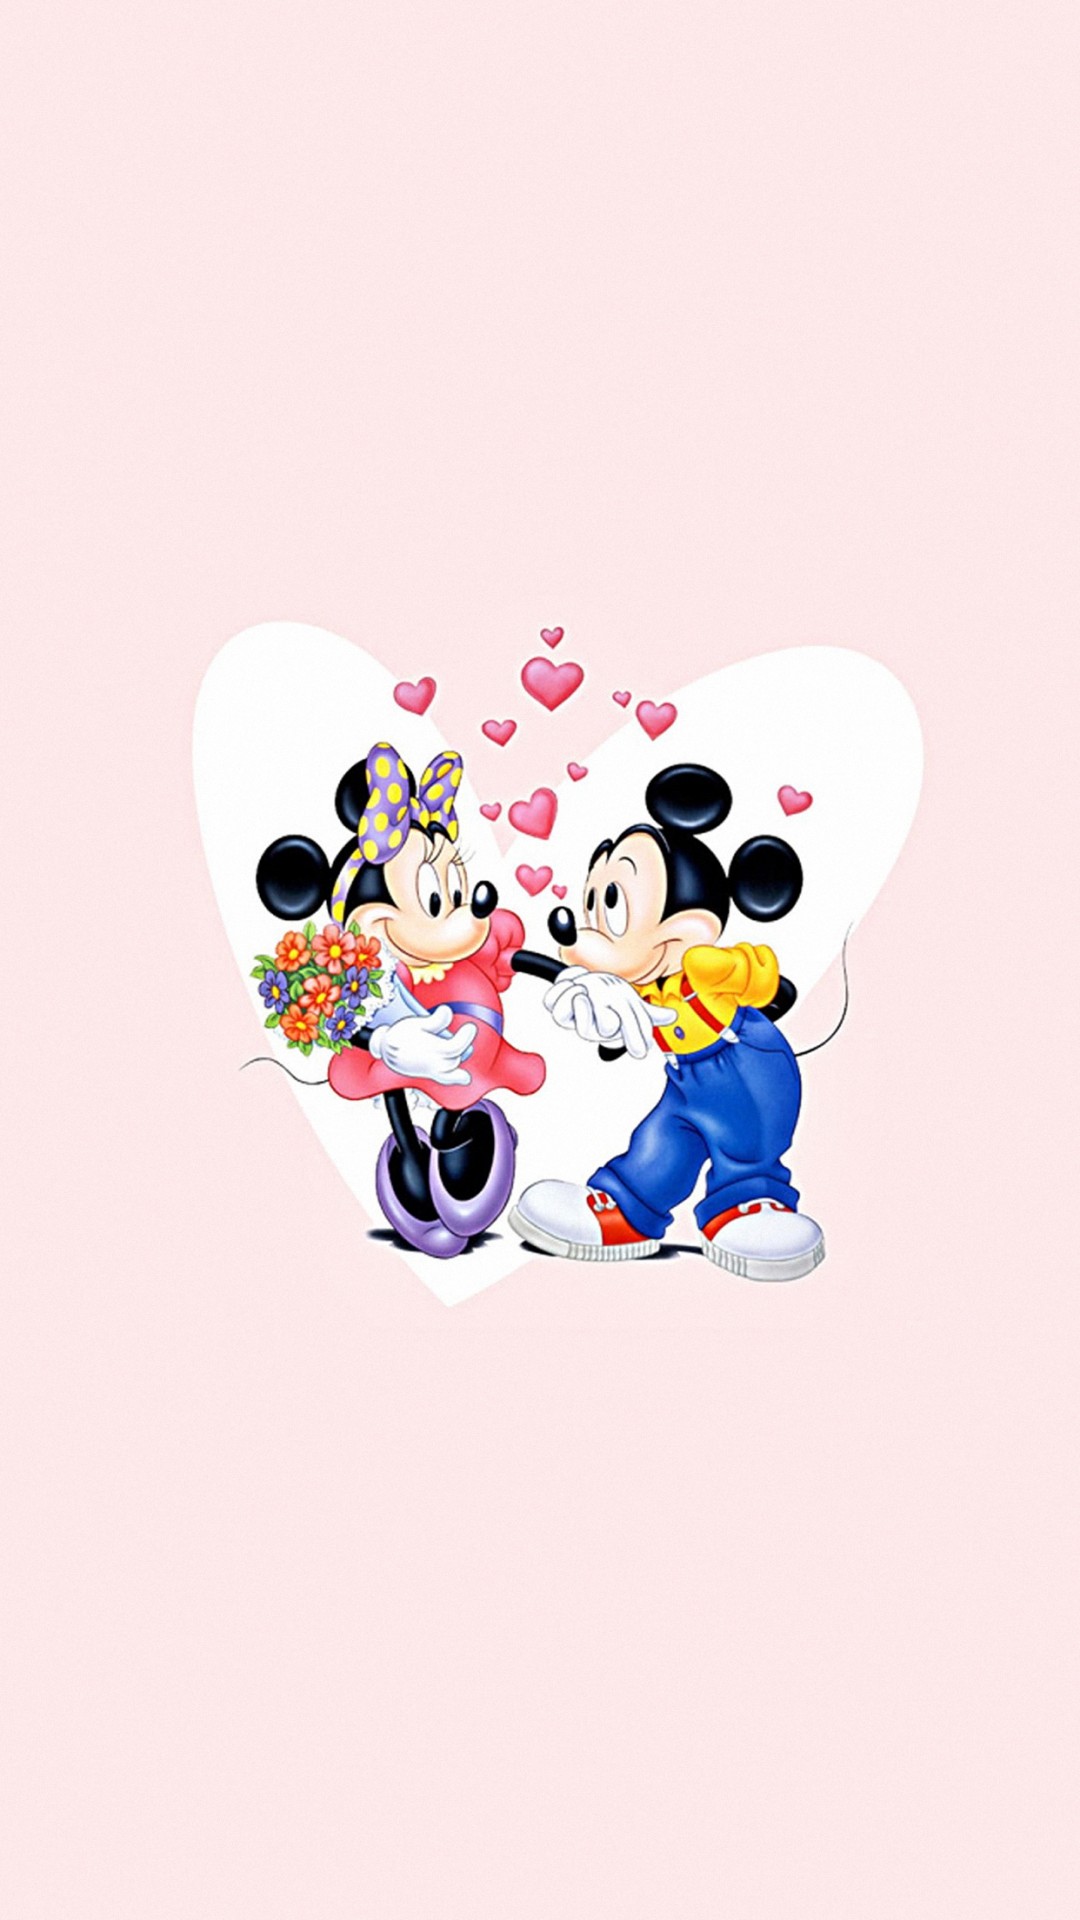 1080x1920 Mickey Mouse Wallpapers for Iphone 7, Iphone 7 plus .